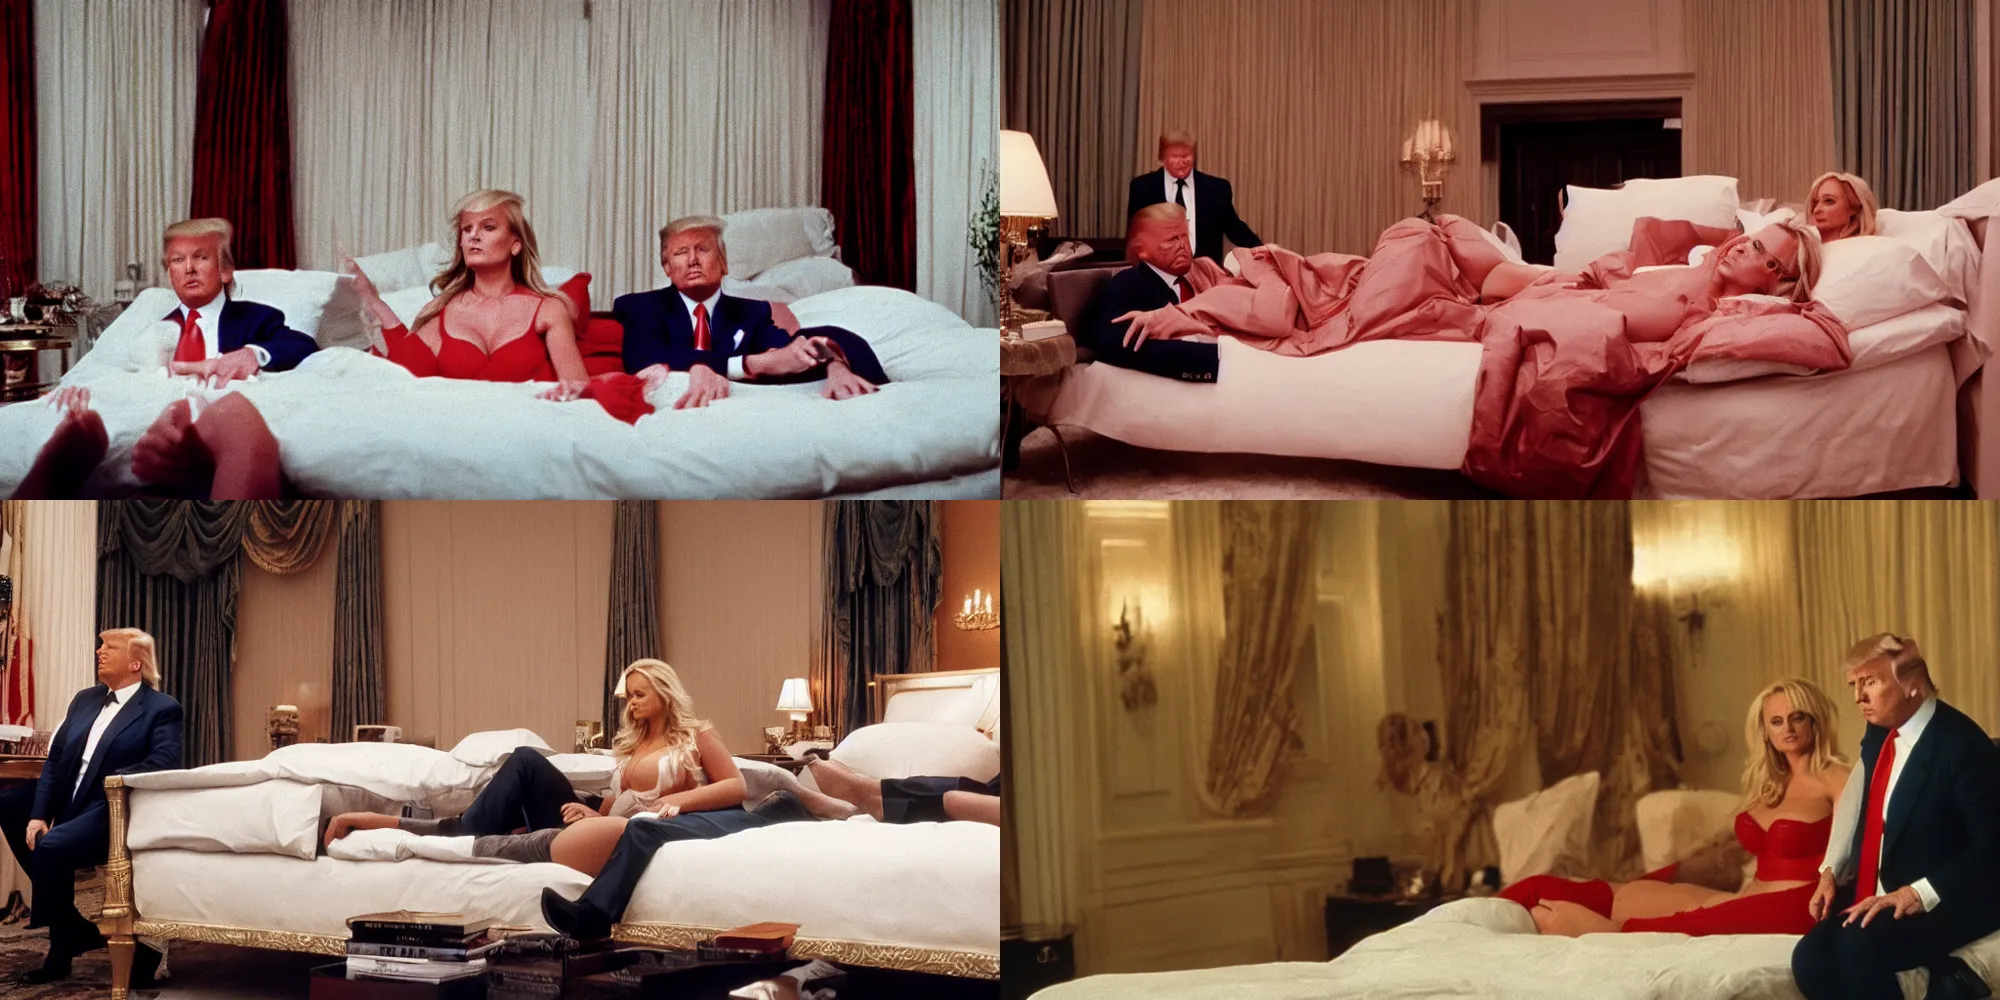 Prompt: donald trump next to stormy daniels on a bed directed by wes anderson, cinestill 8 0 0 t, 1 9 8 0 s movie still, film grain